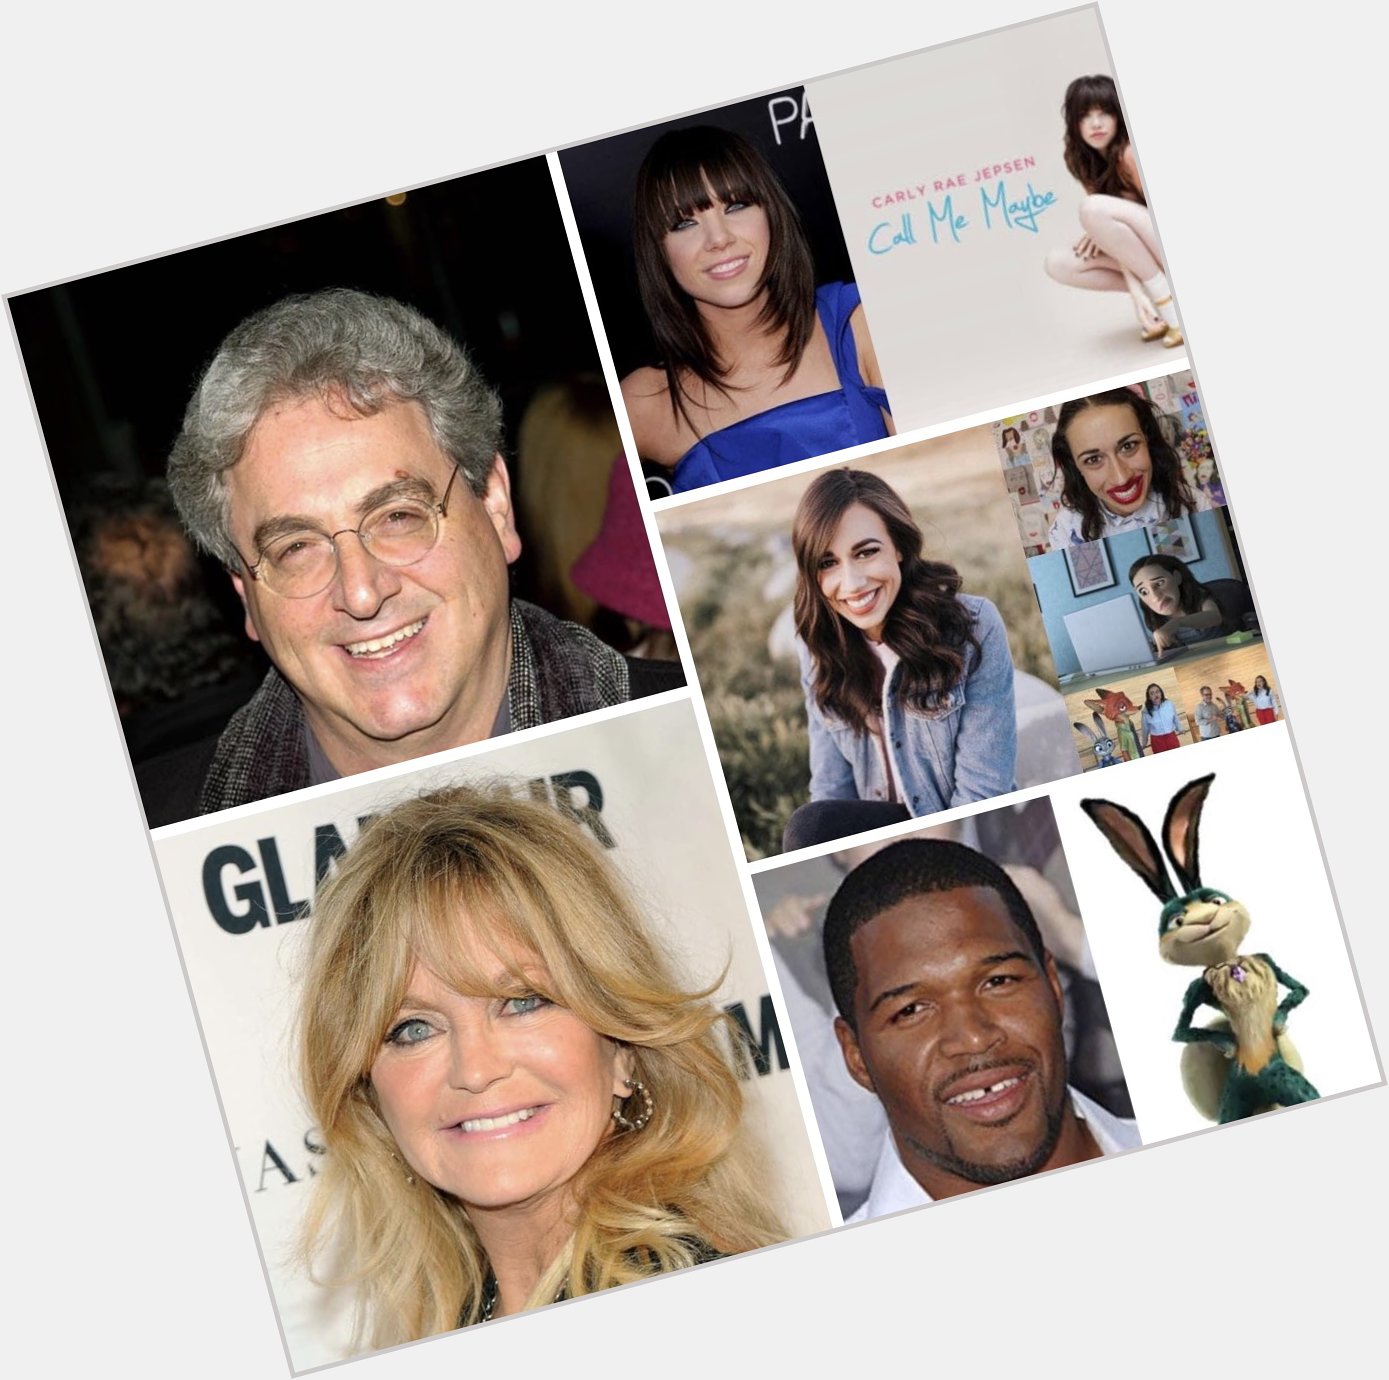 Happy birthday to Harold Ramis, Goldie Hawn, Carly Rae Jepsen, Colleen Ballinger, and Michael Strahan! 